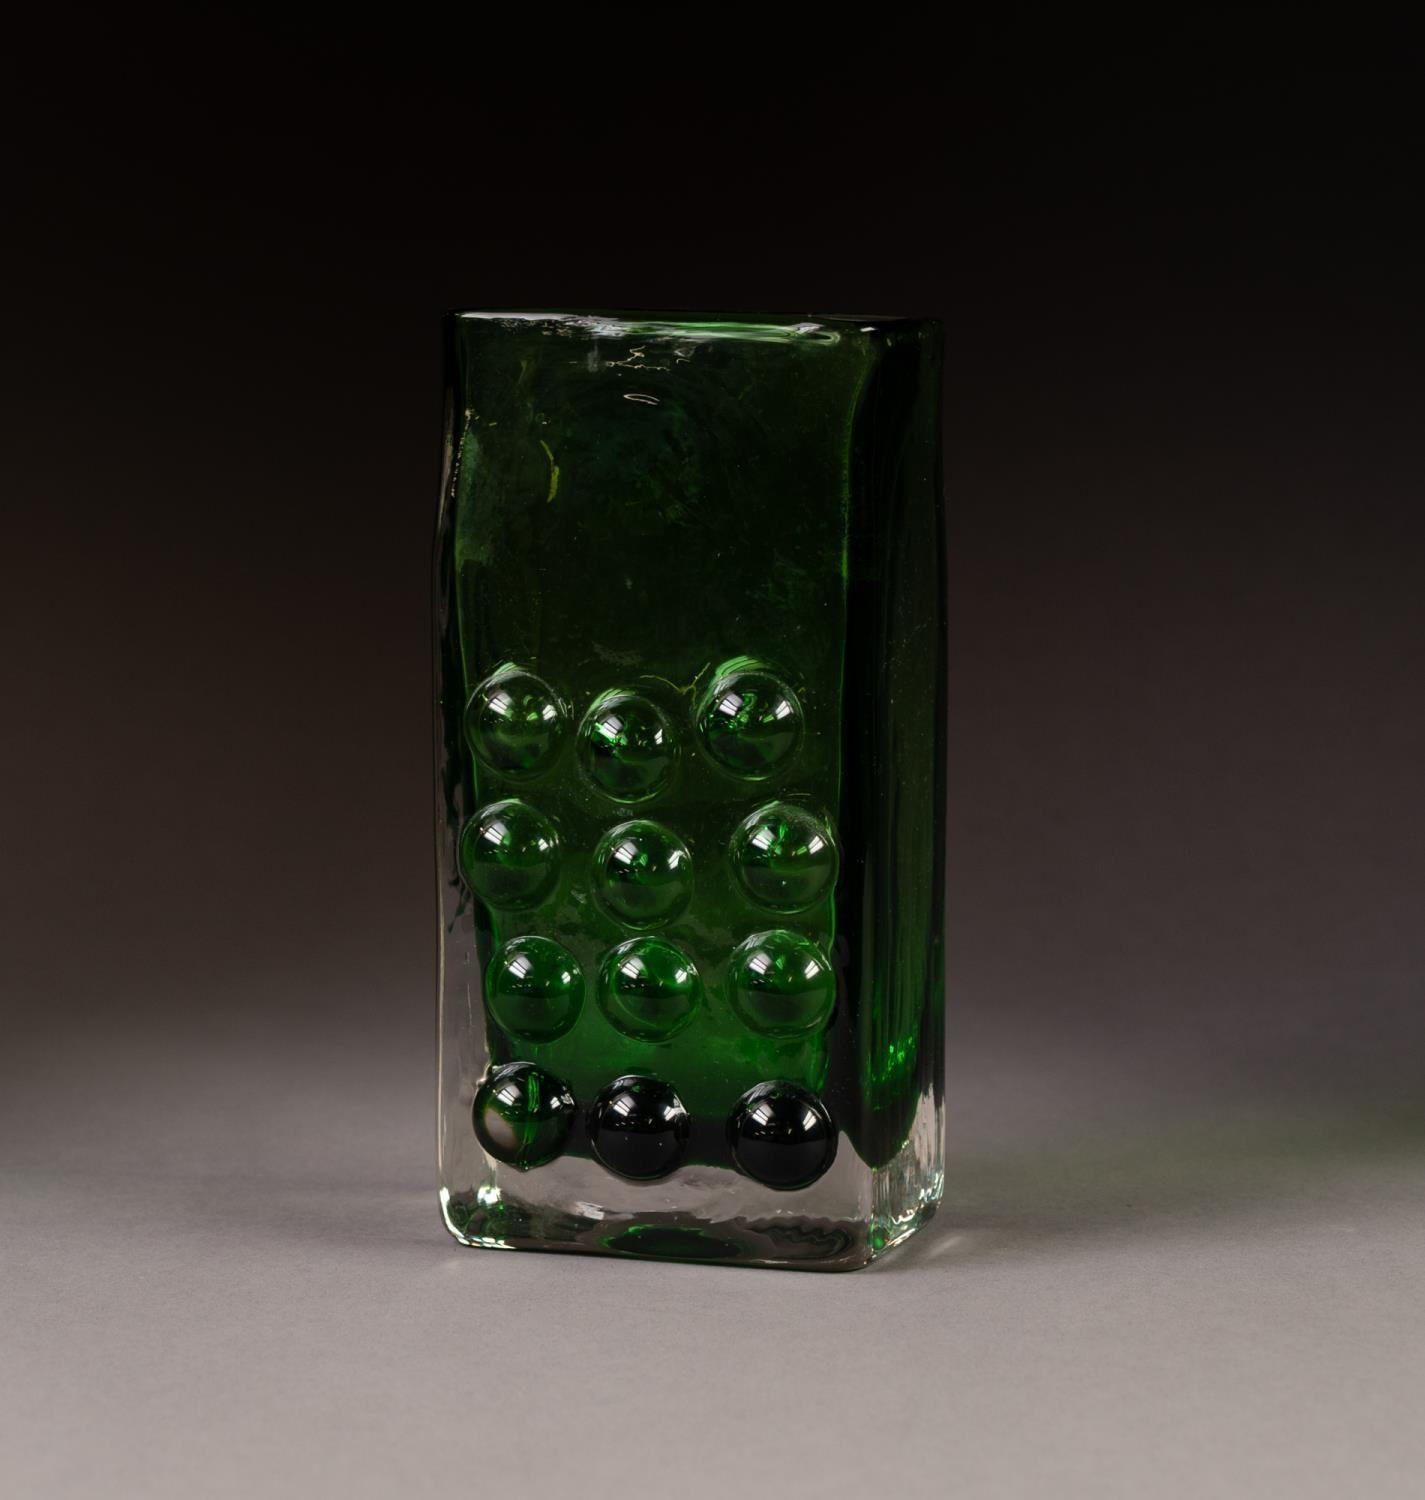 GEOFFREY BAXTER FOR WHITEFRIARS GLASS, ?MOBILE PHONE? MOULDED GLASS VASE IN MEADOW GREEN, mould